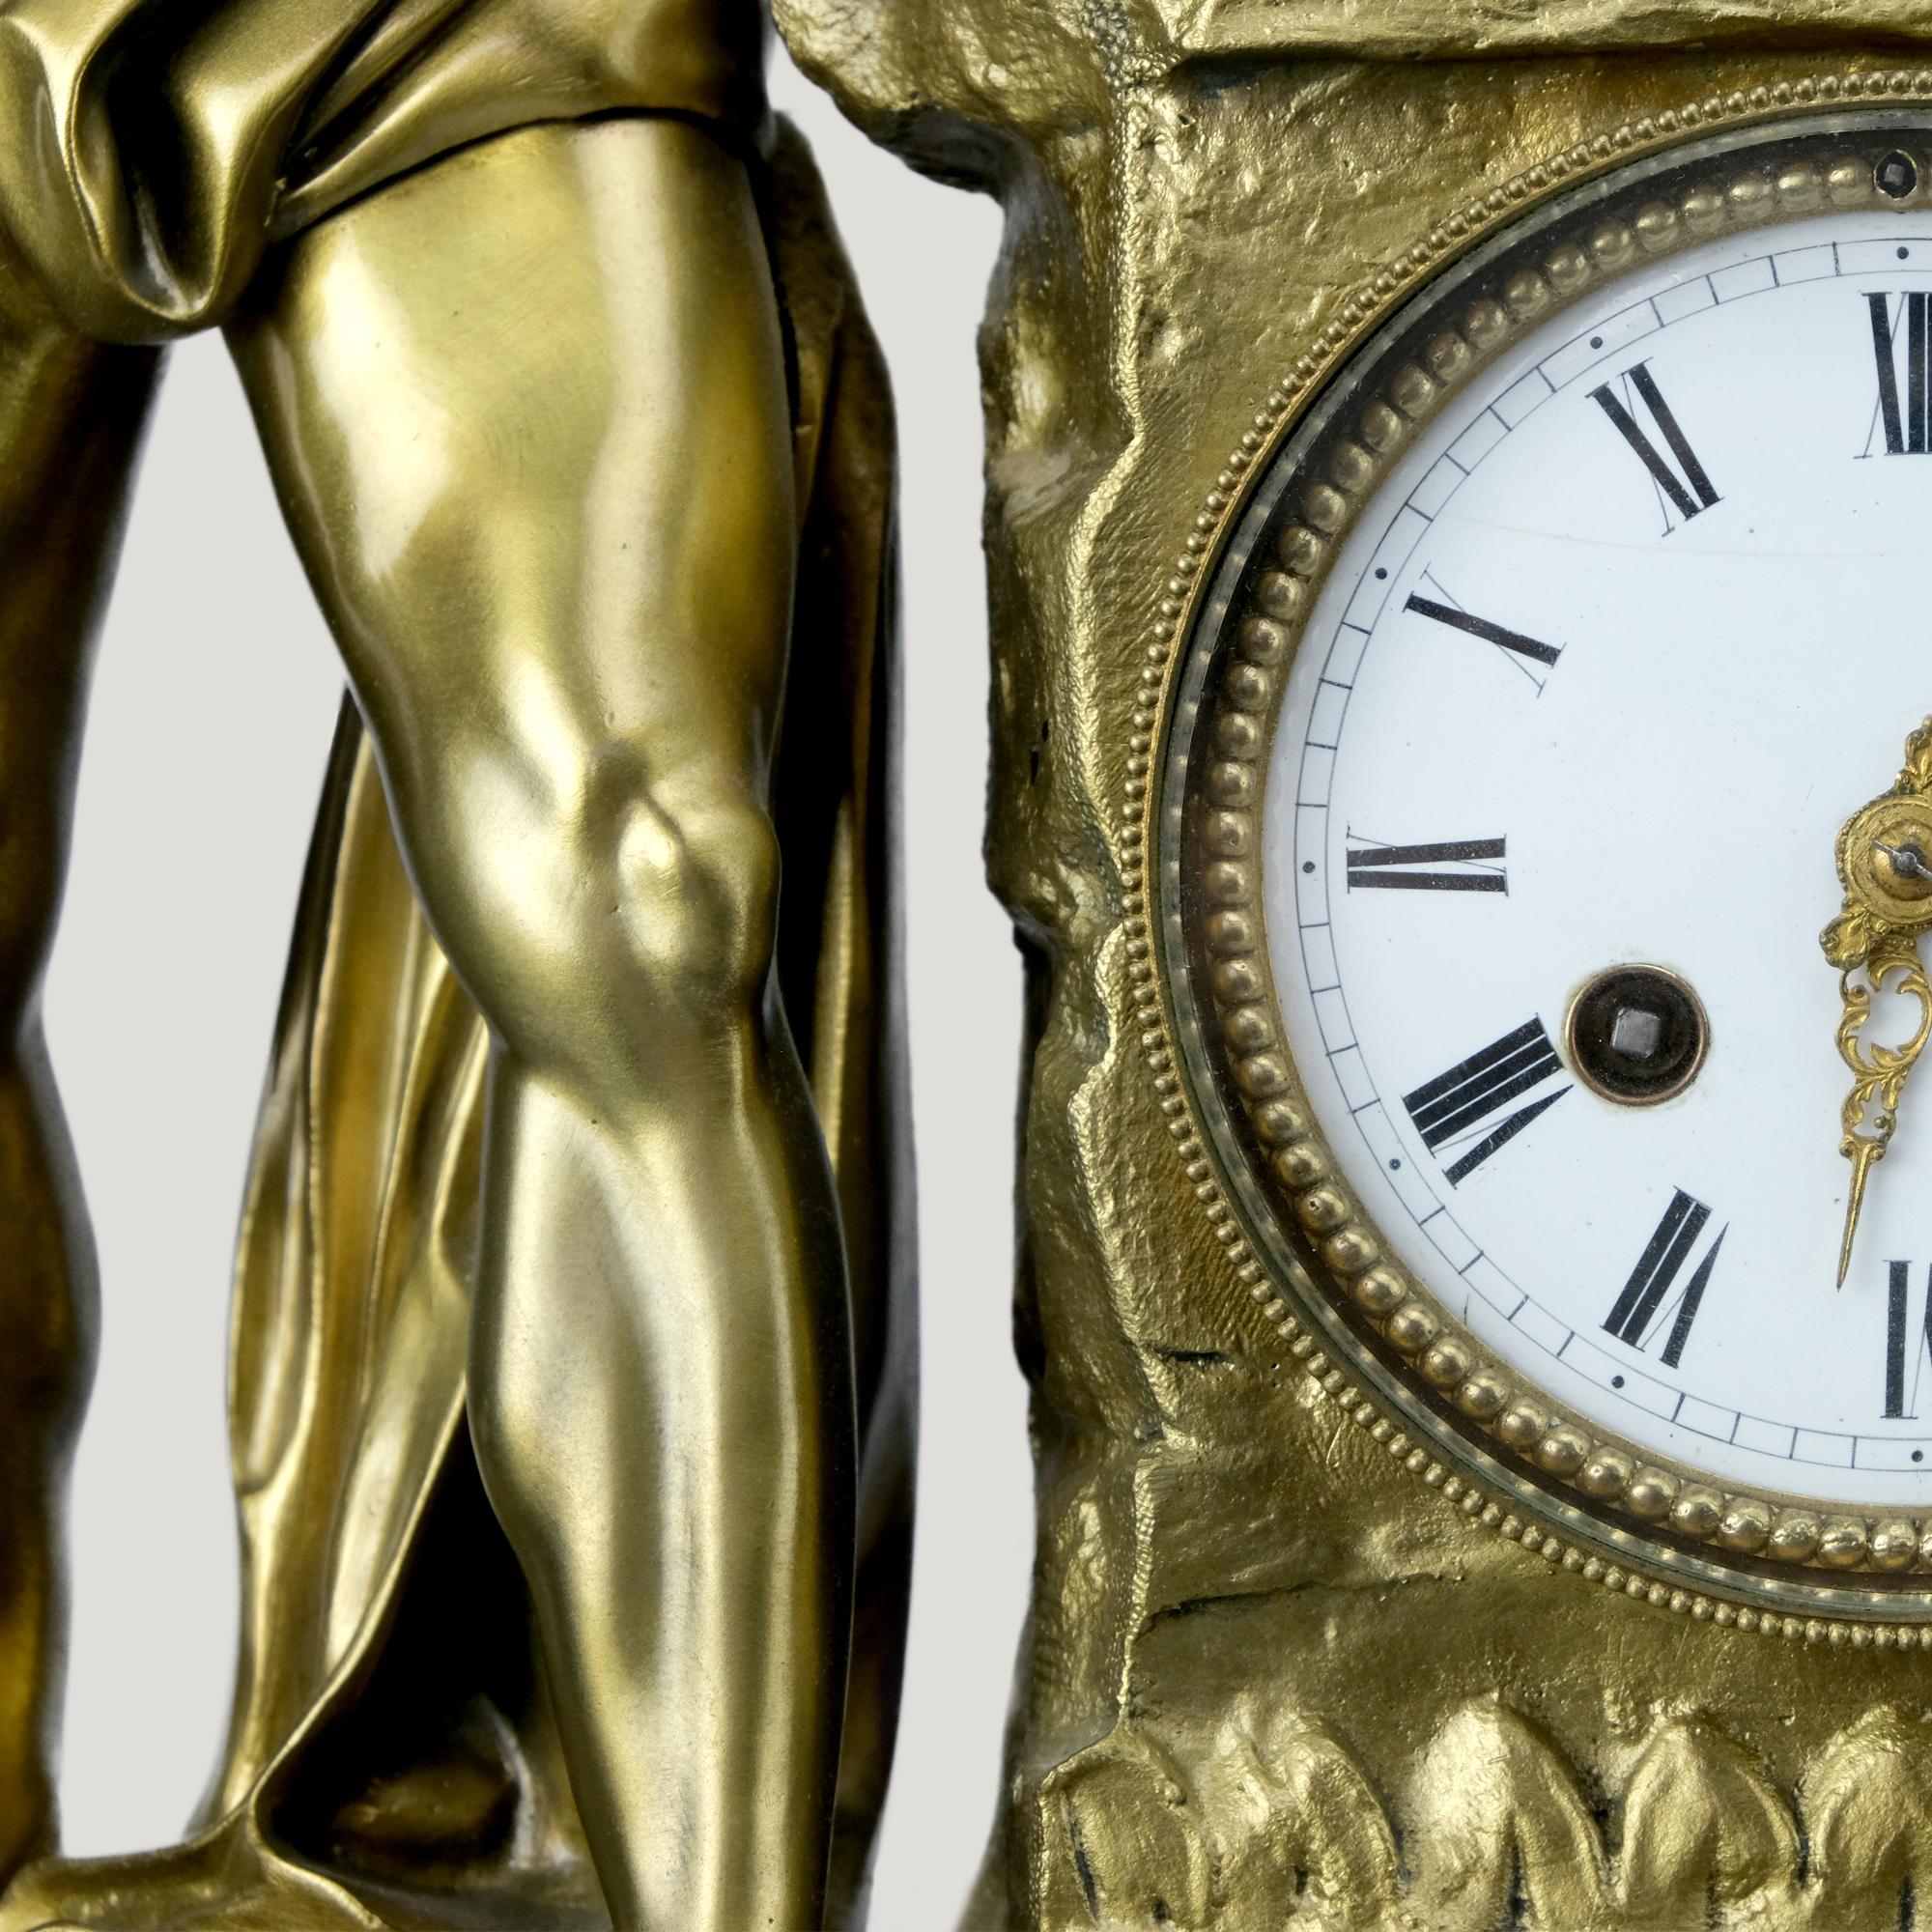 Monumental clock in gilded and patinated bronze representing Spartacus freed from his chains.
Date of manufacture : circa 1850
Working condition, still maintained by the master watchmaker Carpentier in Lille, France.
Paris Movement.

The model of